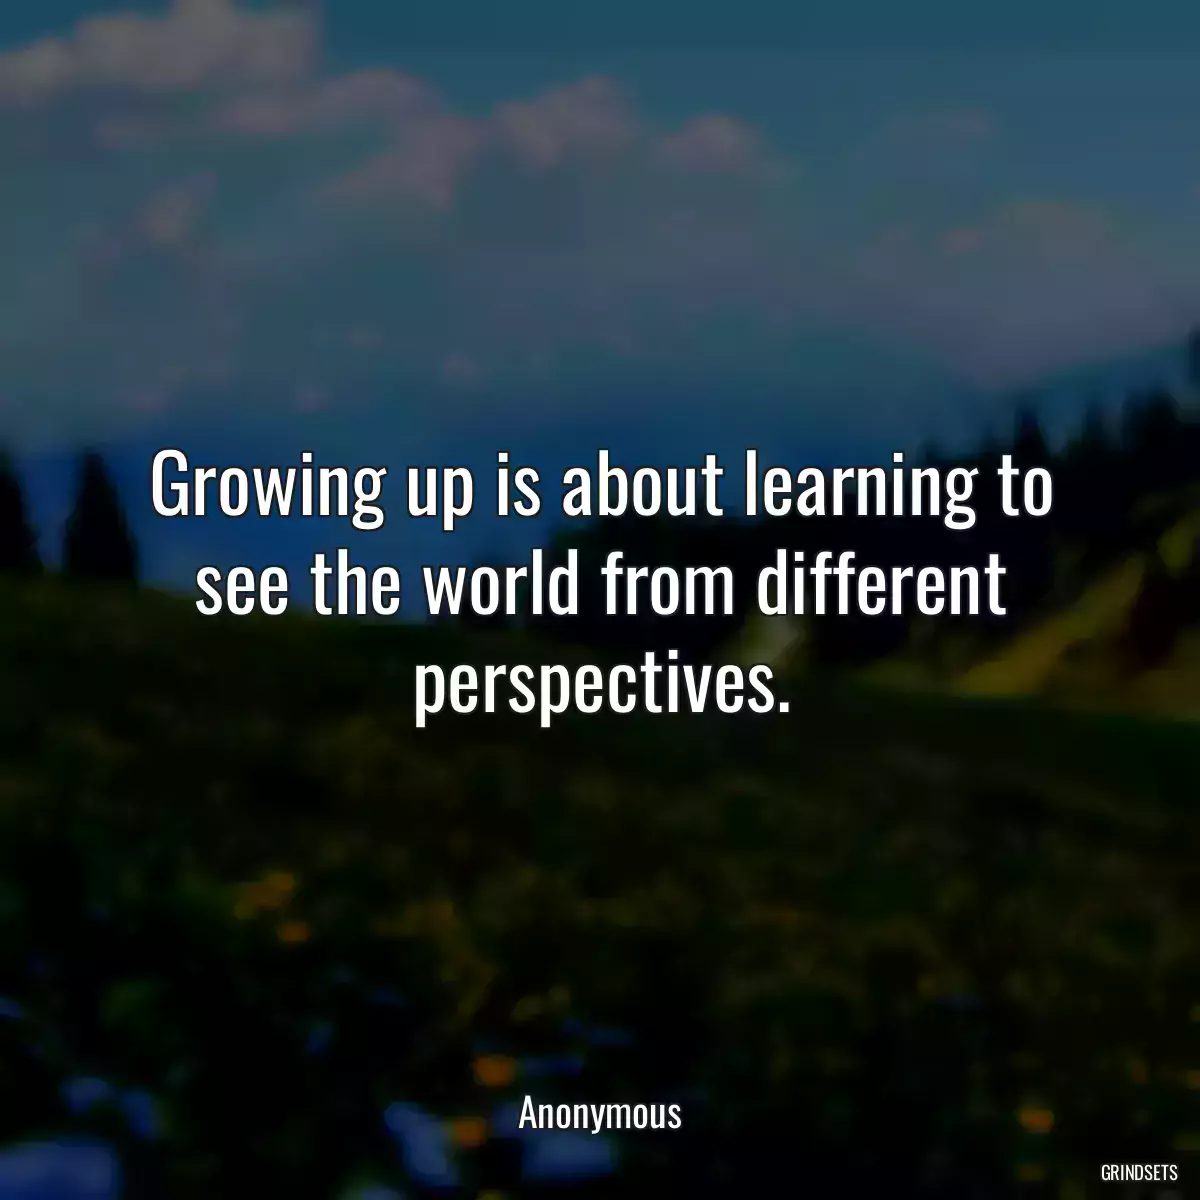 Growing up is about learning to see the world from different perspectives.